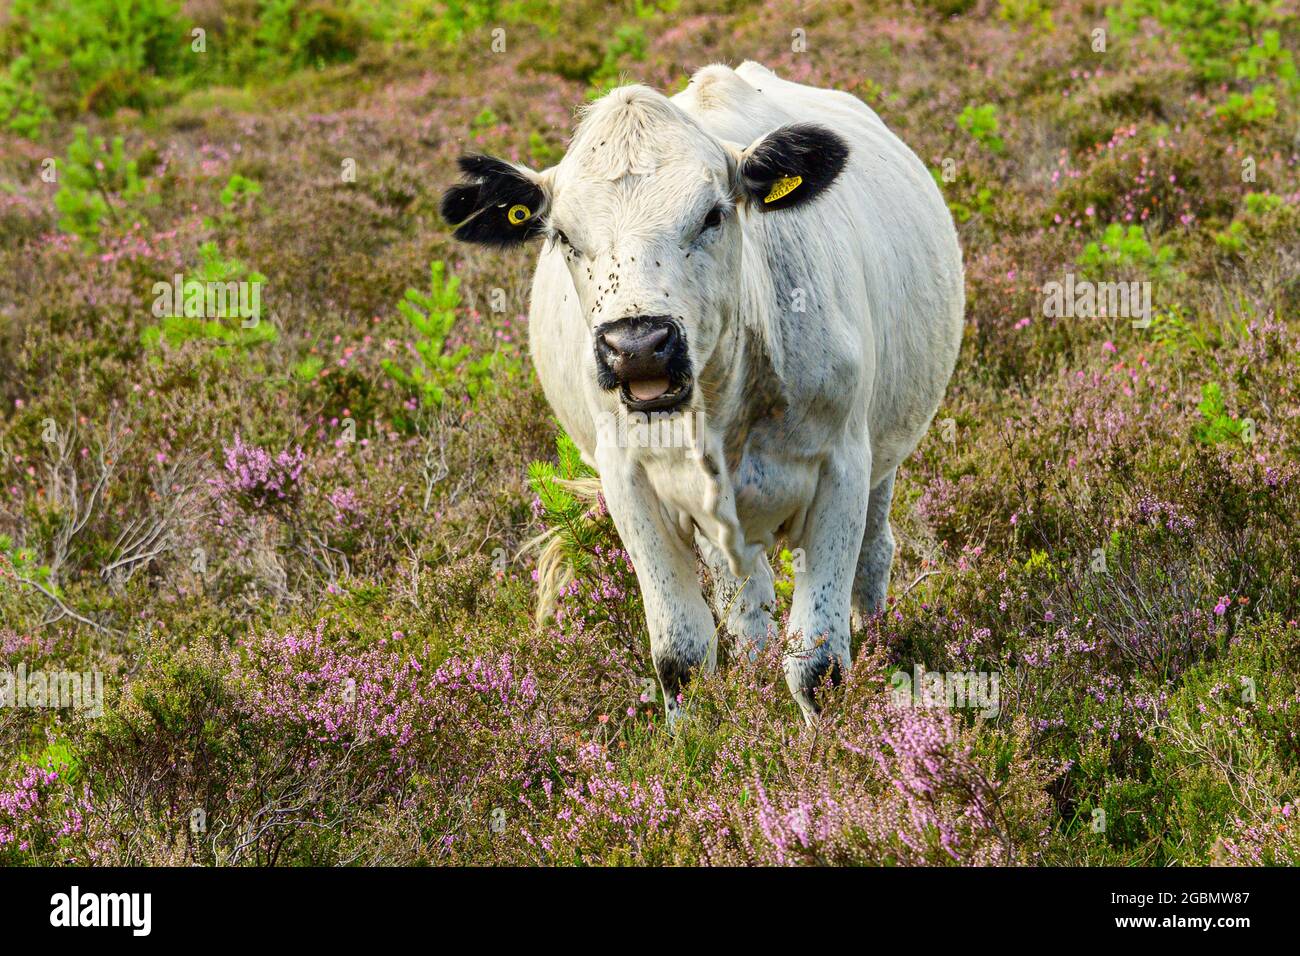 Roaming white cow walking through the pink heather and bracken at Avon Heath Country Park at St. Leonard's, St Ives, Ringwood, Dorset, England Stock Photo